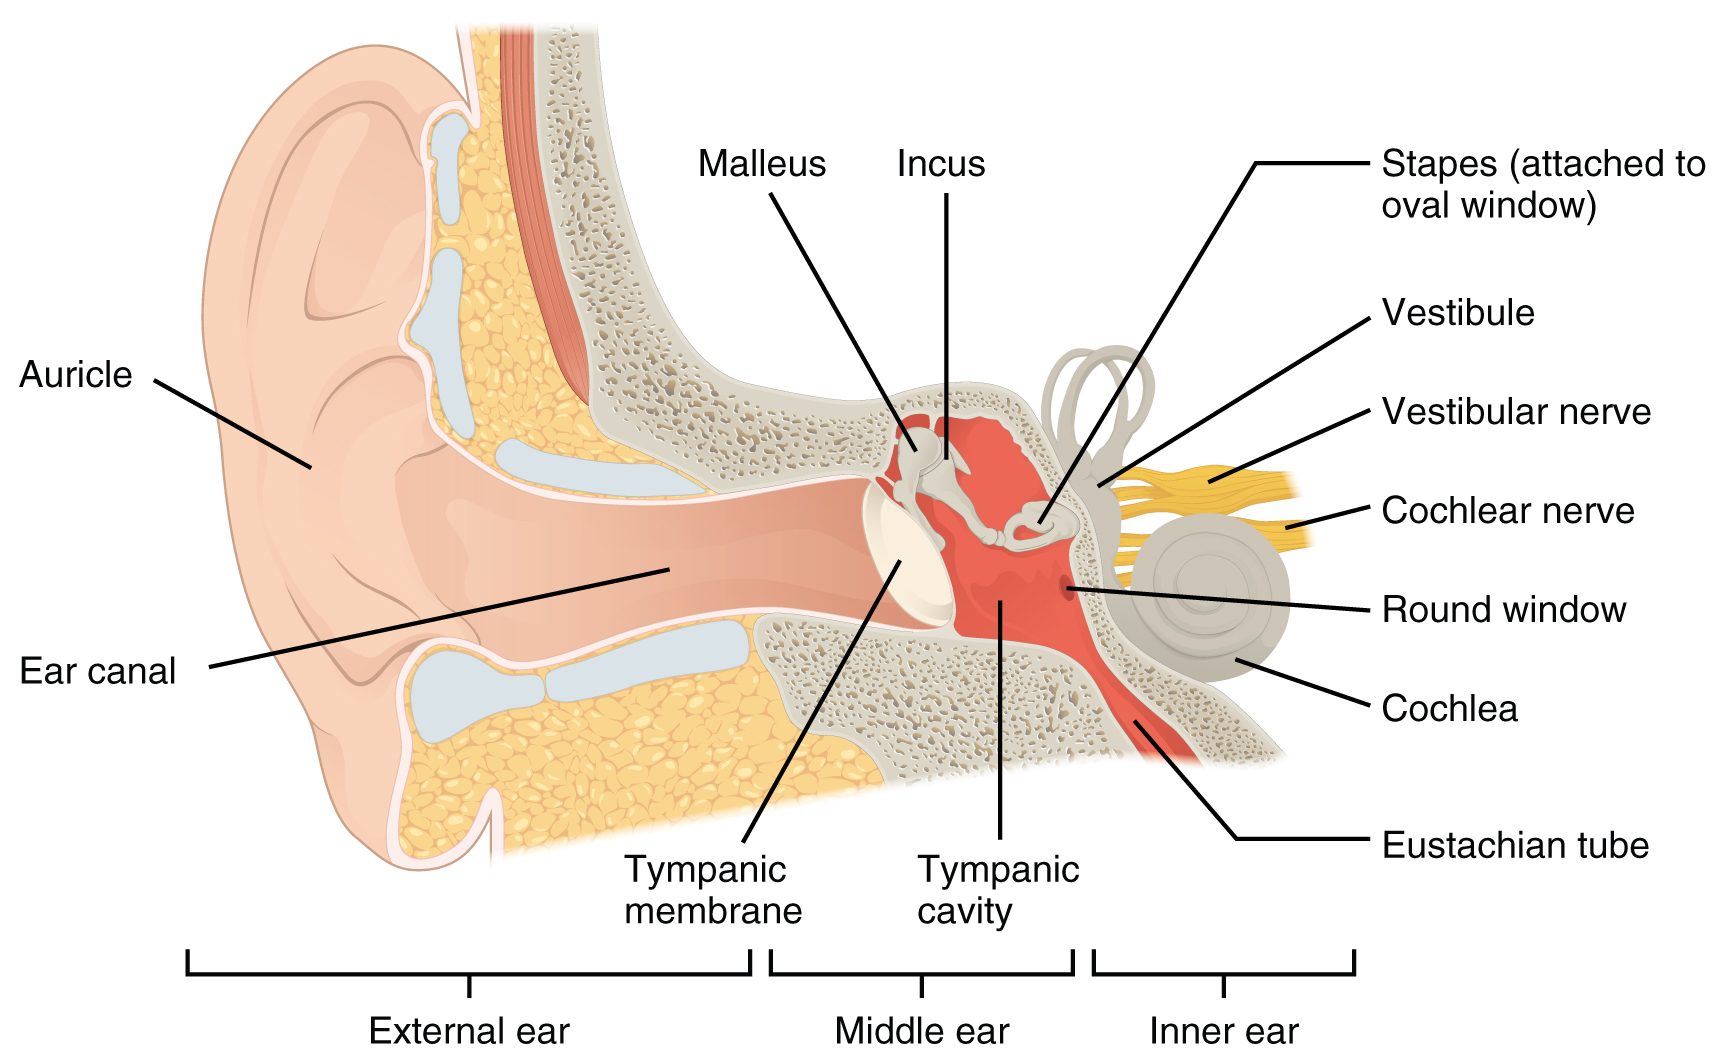 Diagram of the ear with the outer ear, middle ear, and inner ear visible.